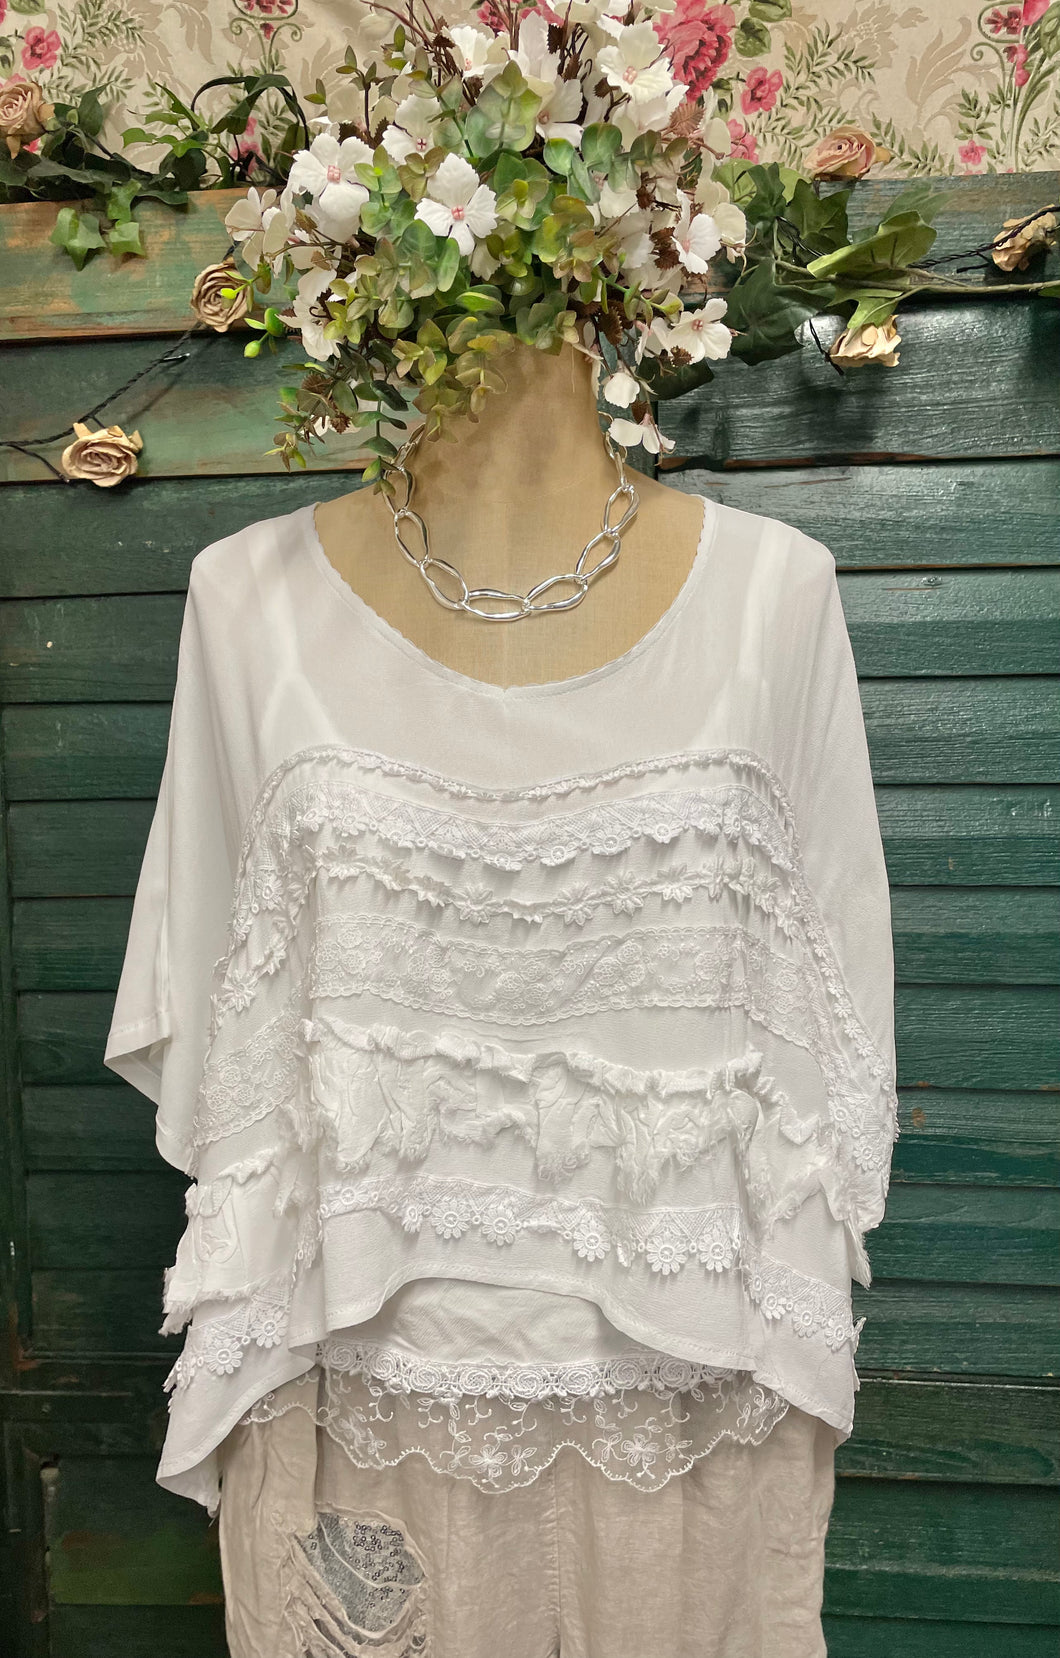 White lace detailed overtop